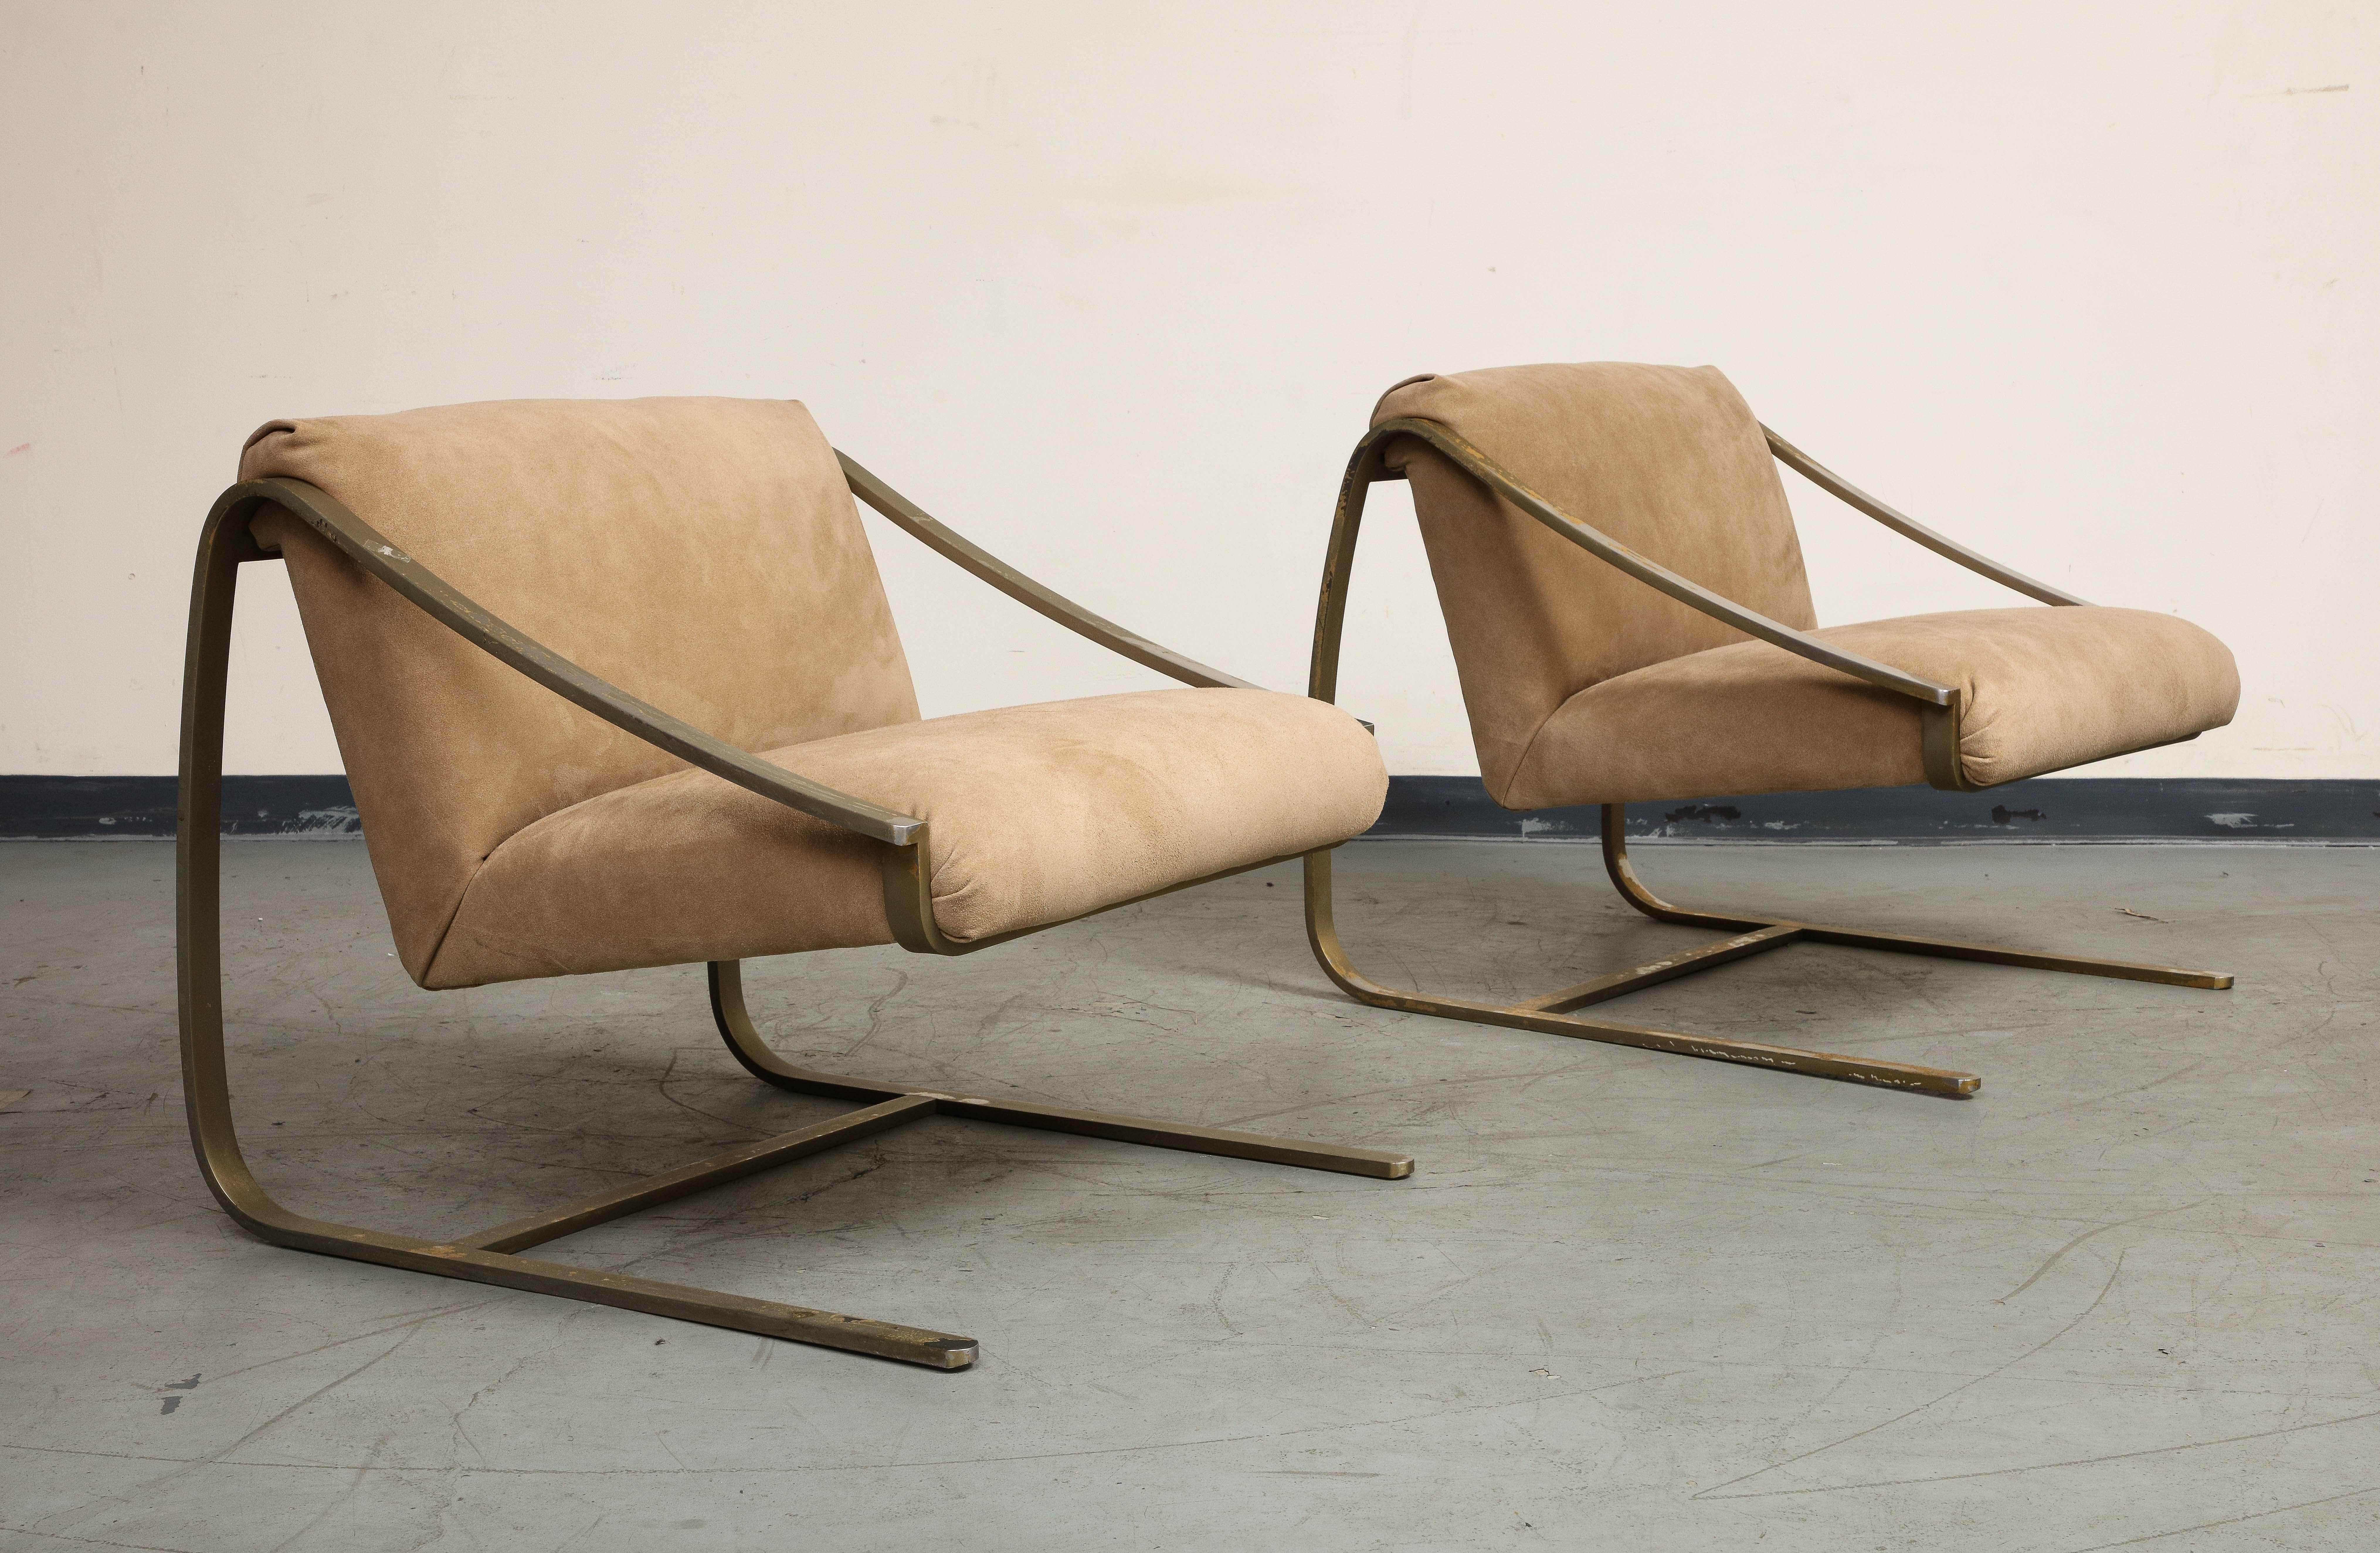 Pair of Bronze and Suede Modernist Lounge Chairs, circa 1965 For Sale 5